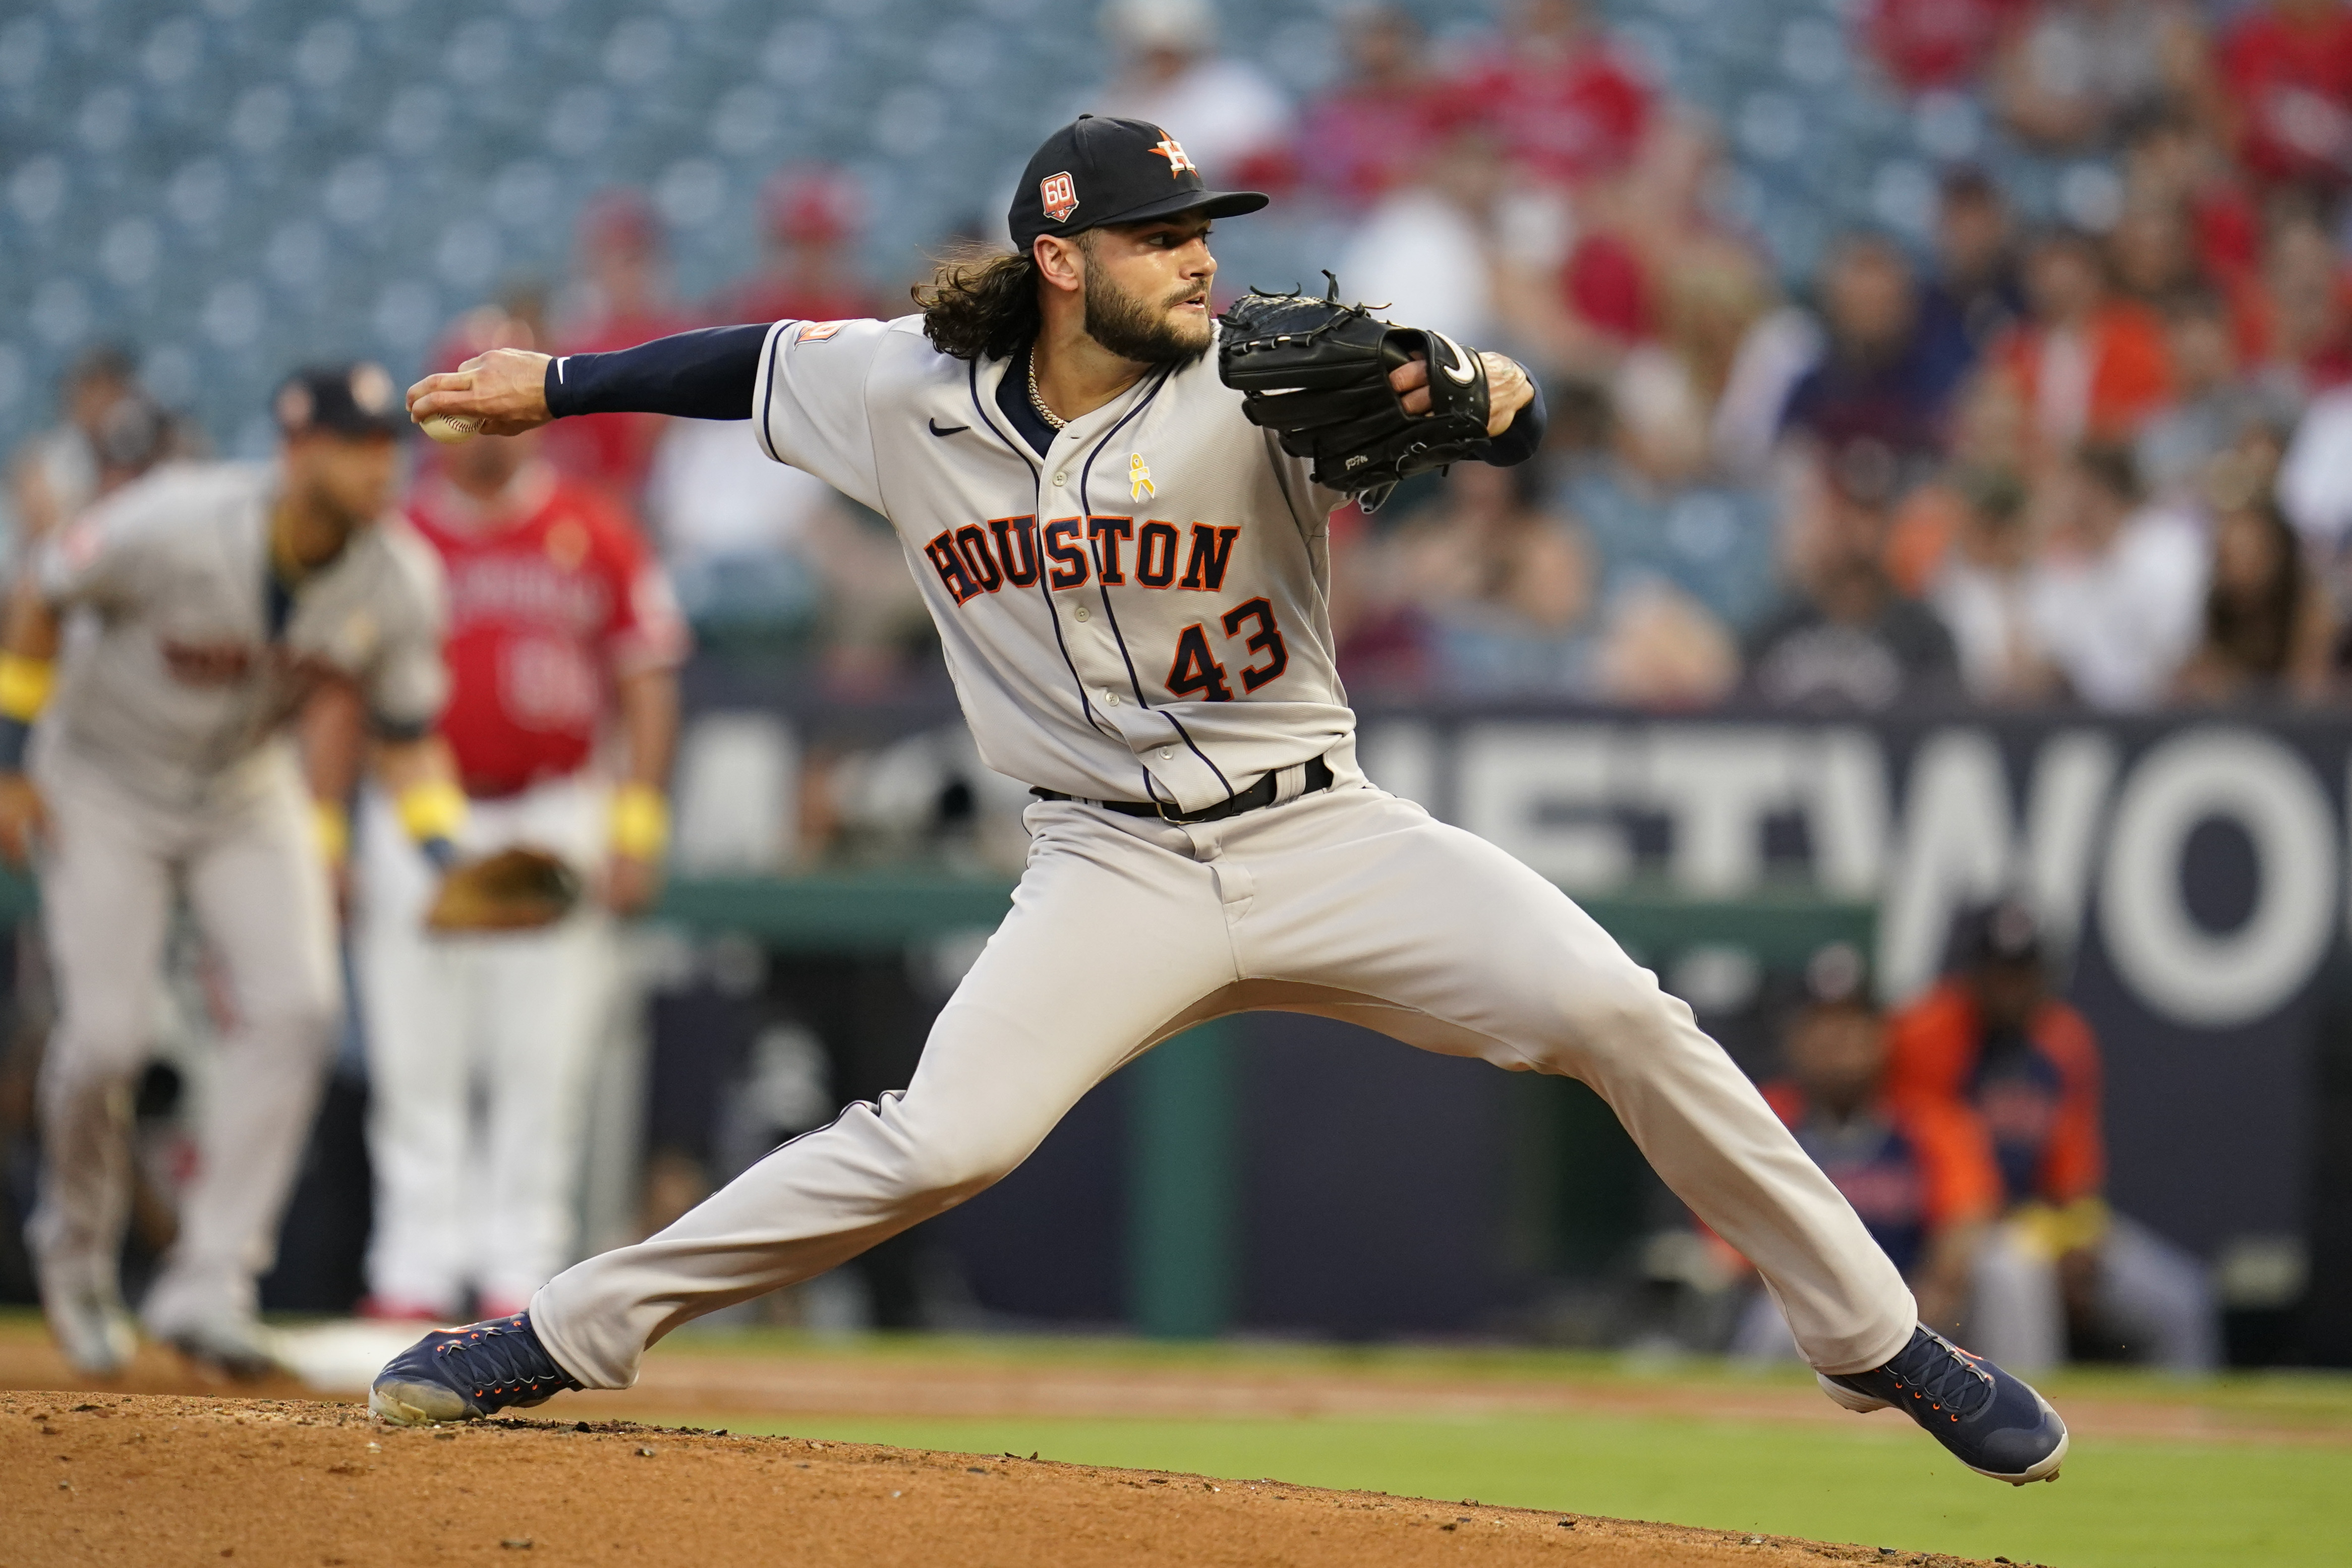 McCullers sharp again, pitches into 6th as Astros top Angels